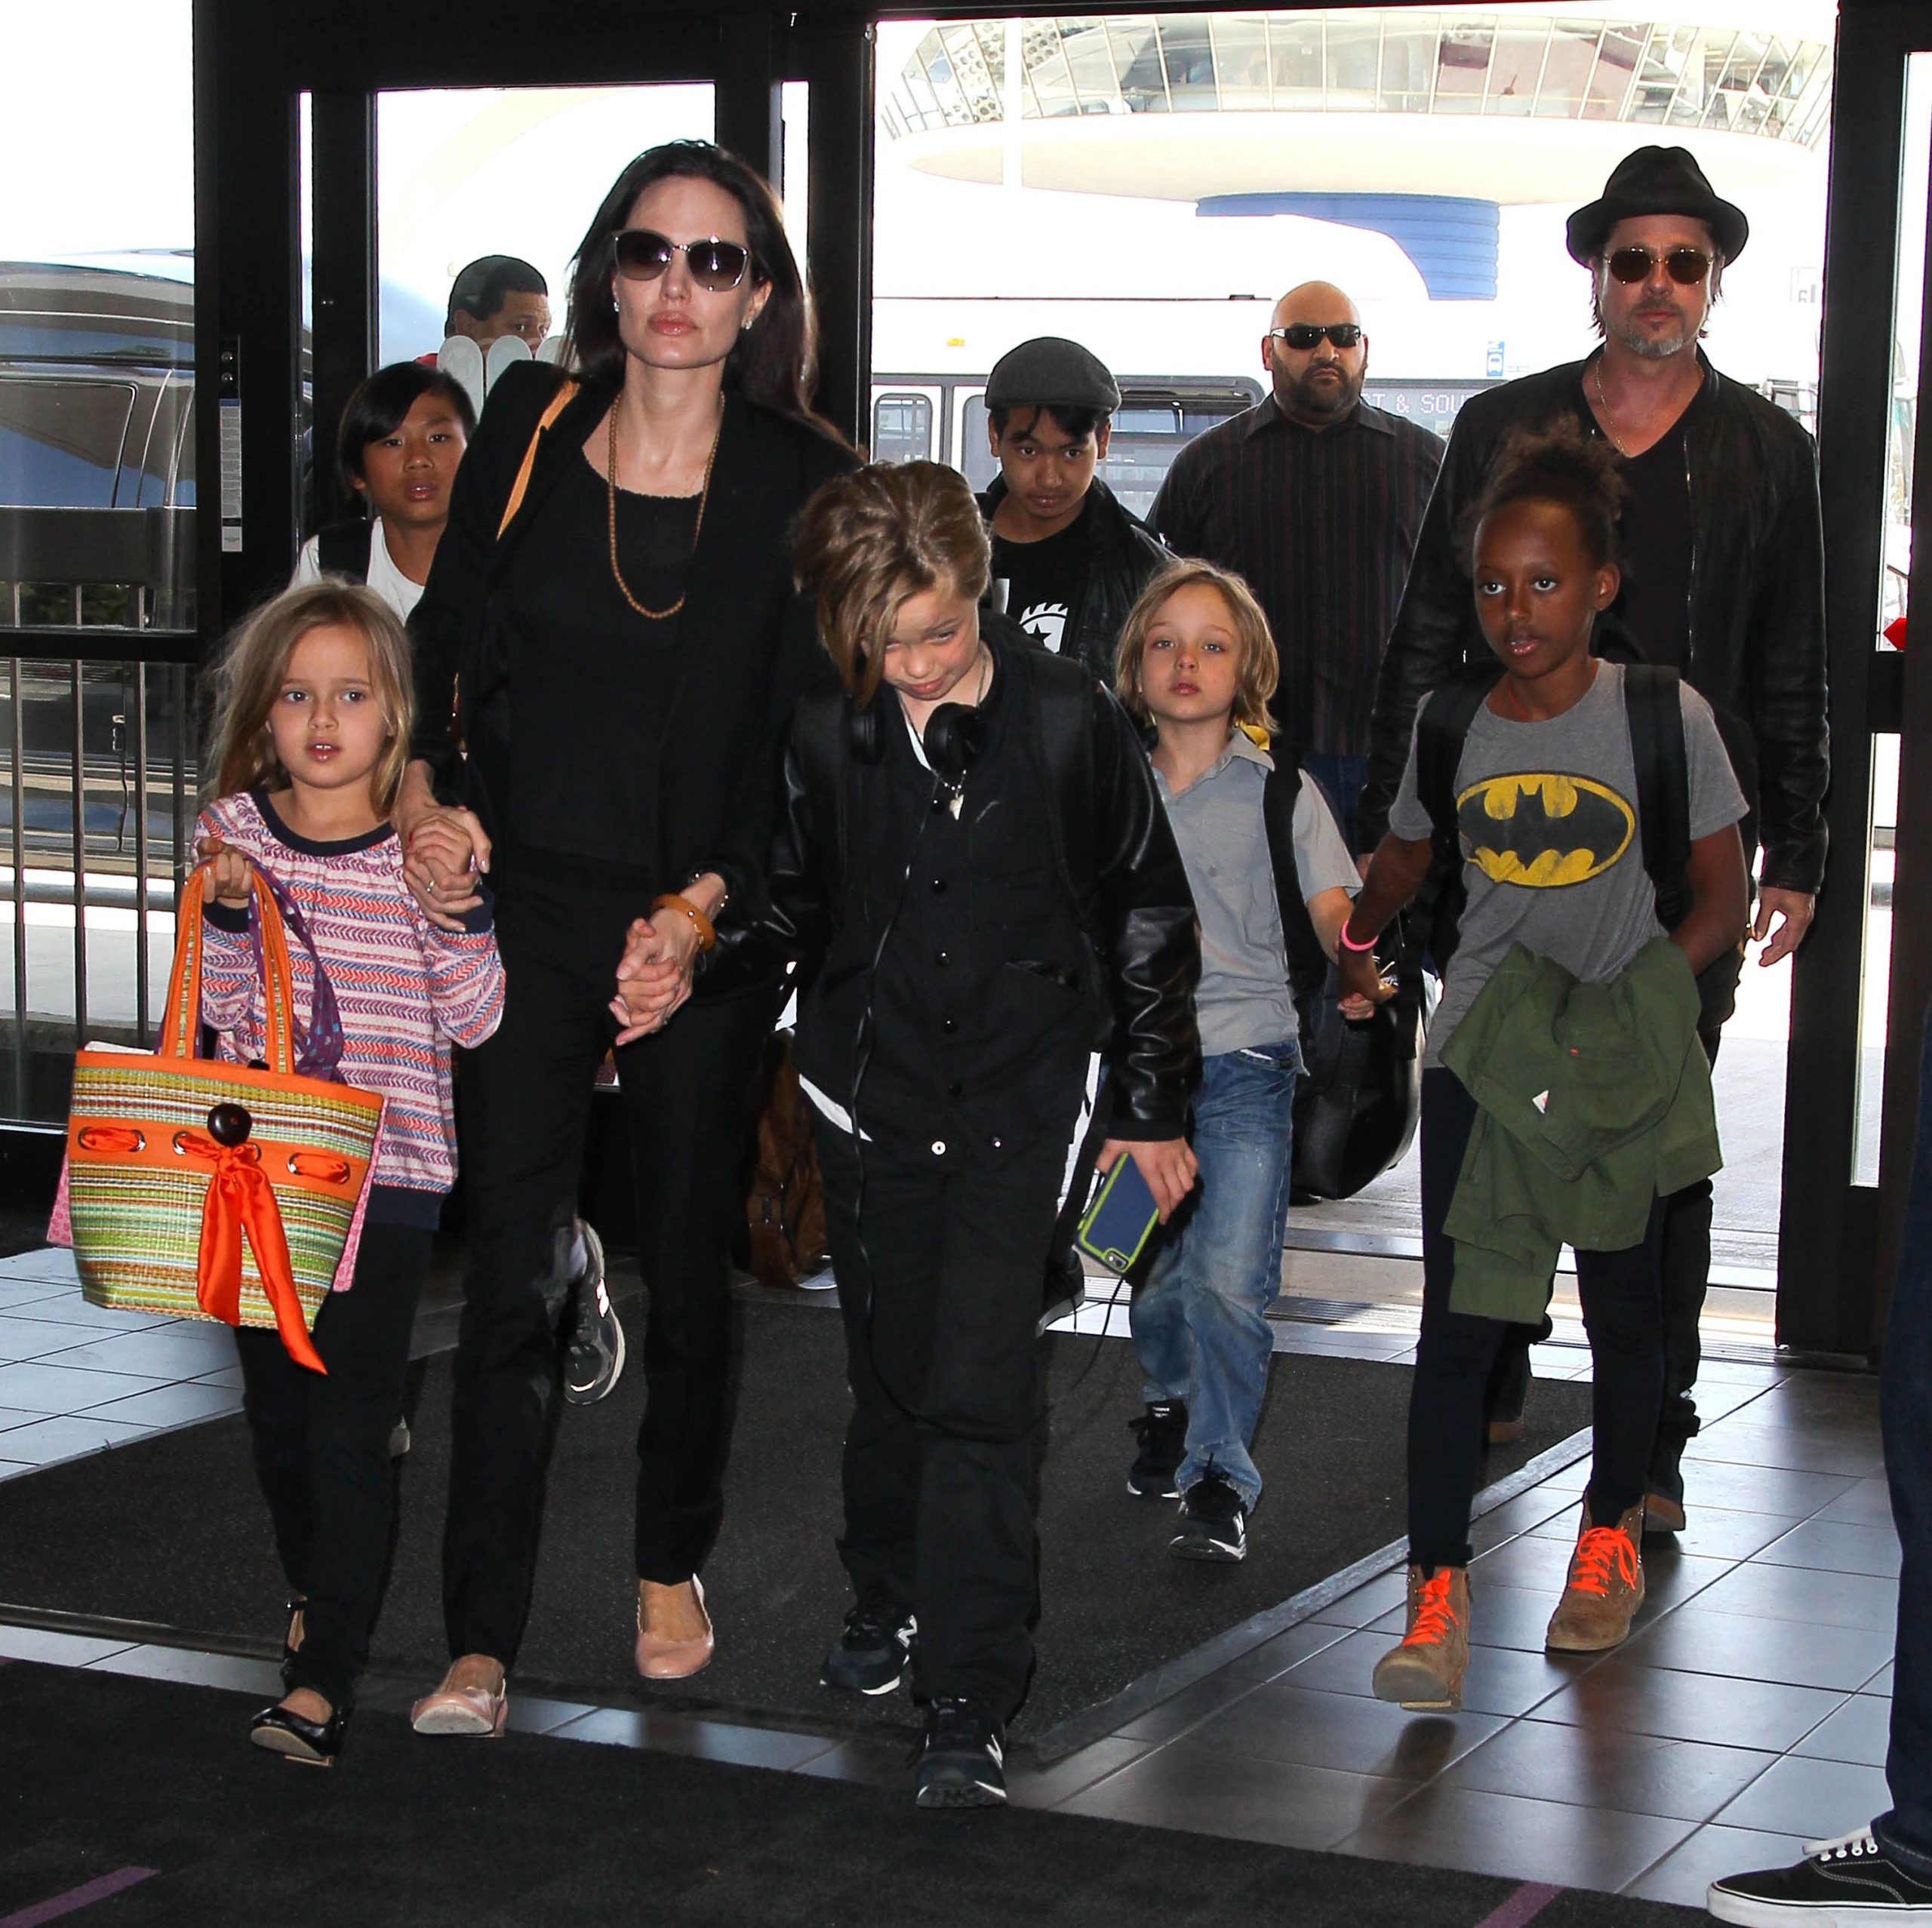 Brad Pitt Doesn't share a Lovable Bond with his Eldest Son Maddox? 1